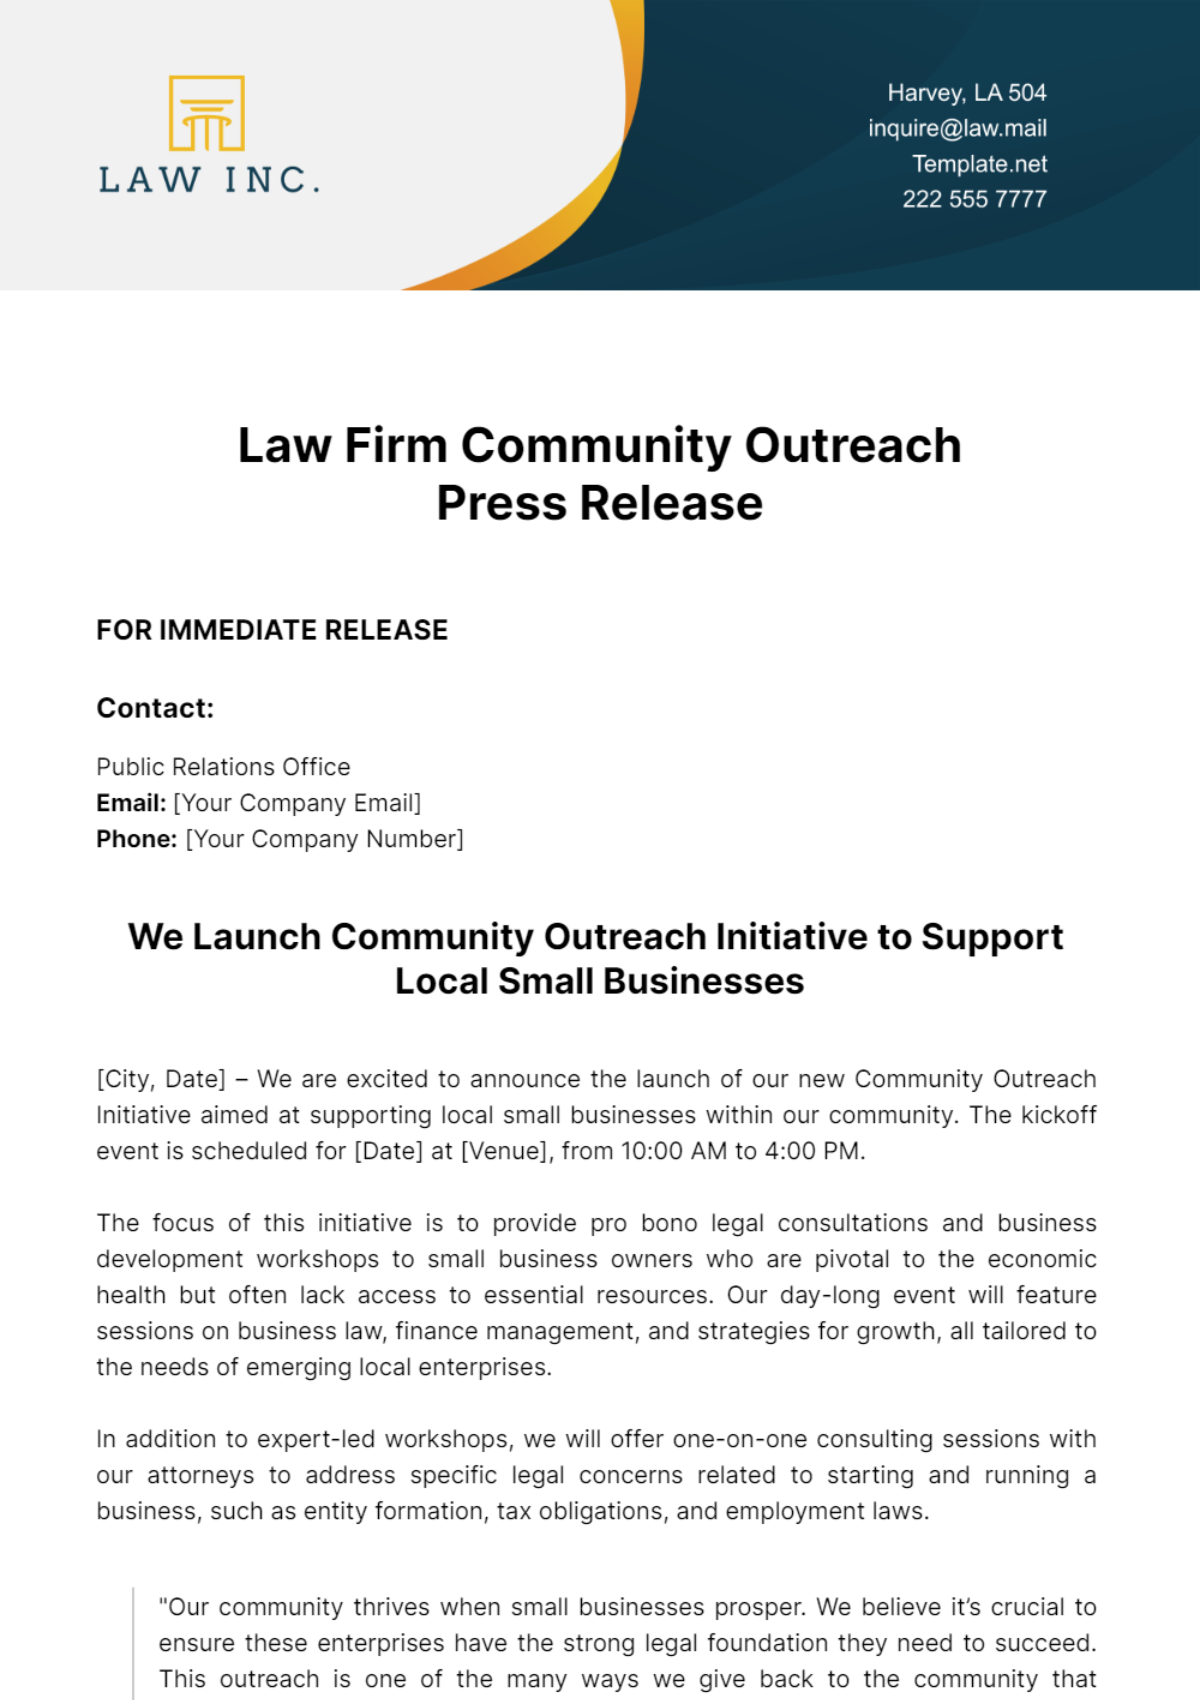 Law Firm Community Outreach Press Release Template